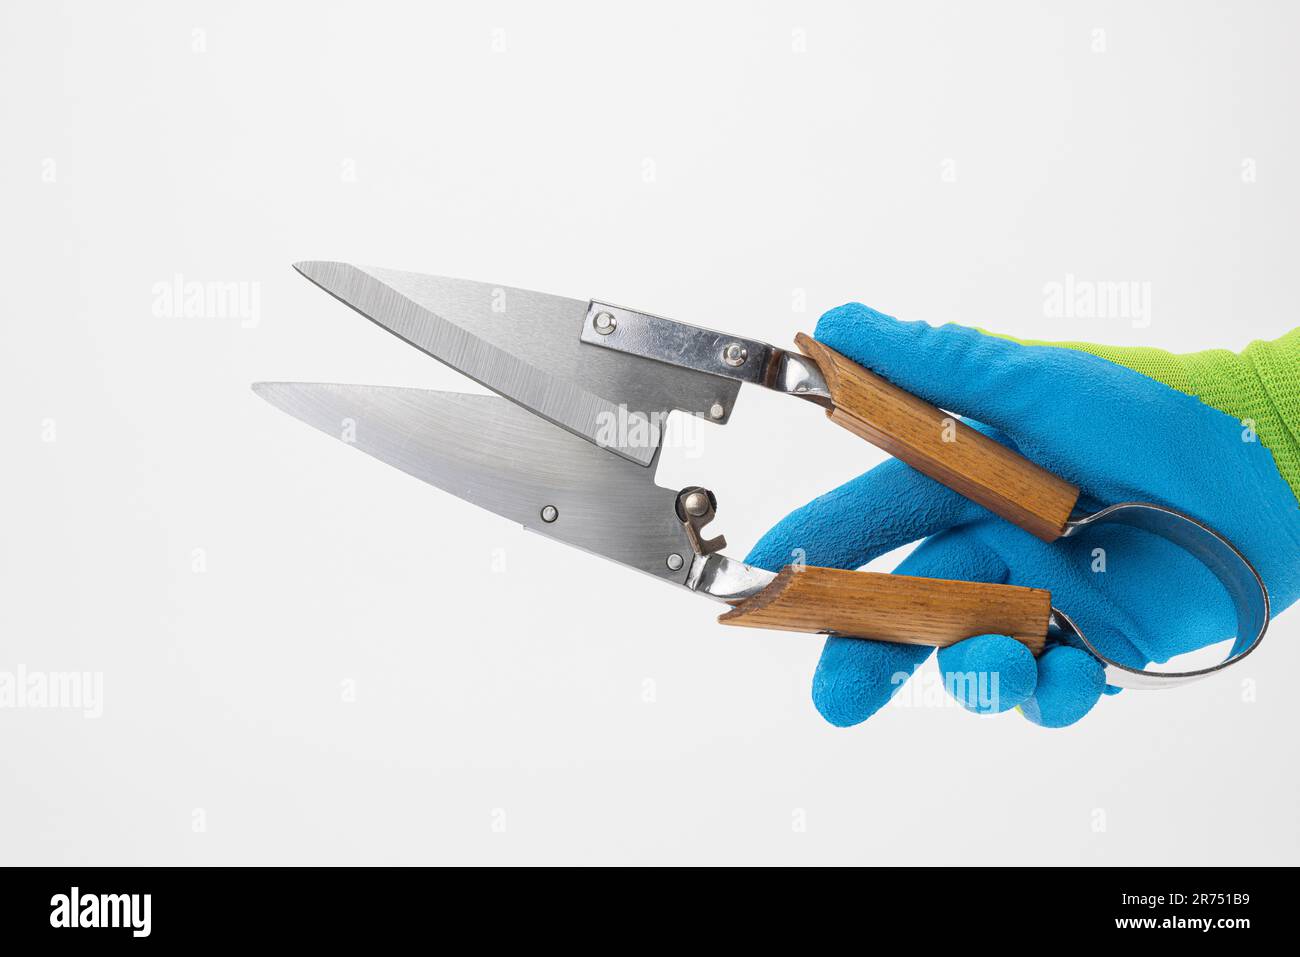 Hand with work glove holds boxwood shears, white background, Stock Photo